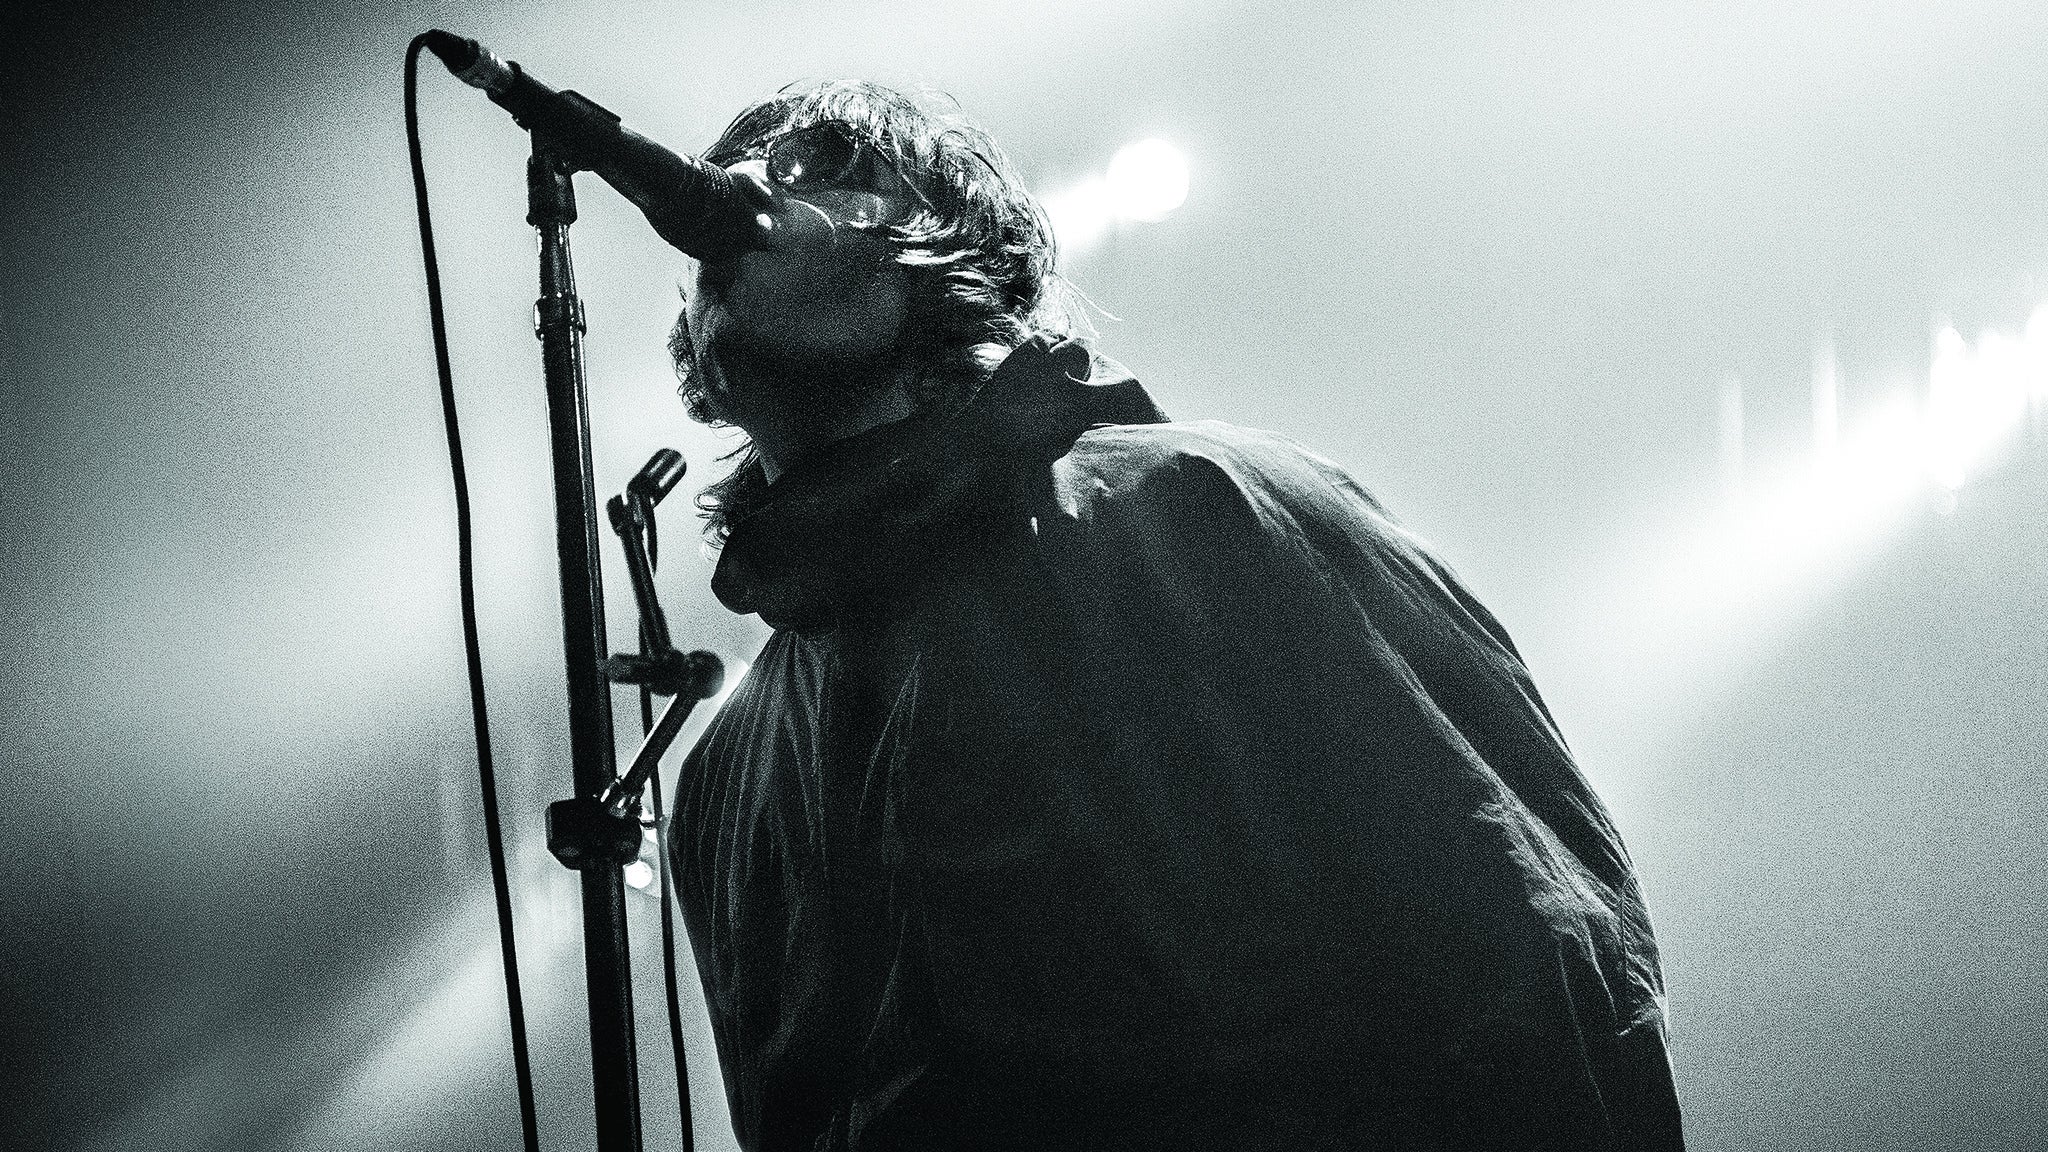 Liam Gallagher in Los Angeles promo photo for Live Nation Mobile App presale offer code